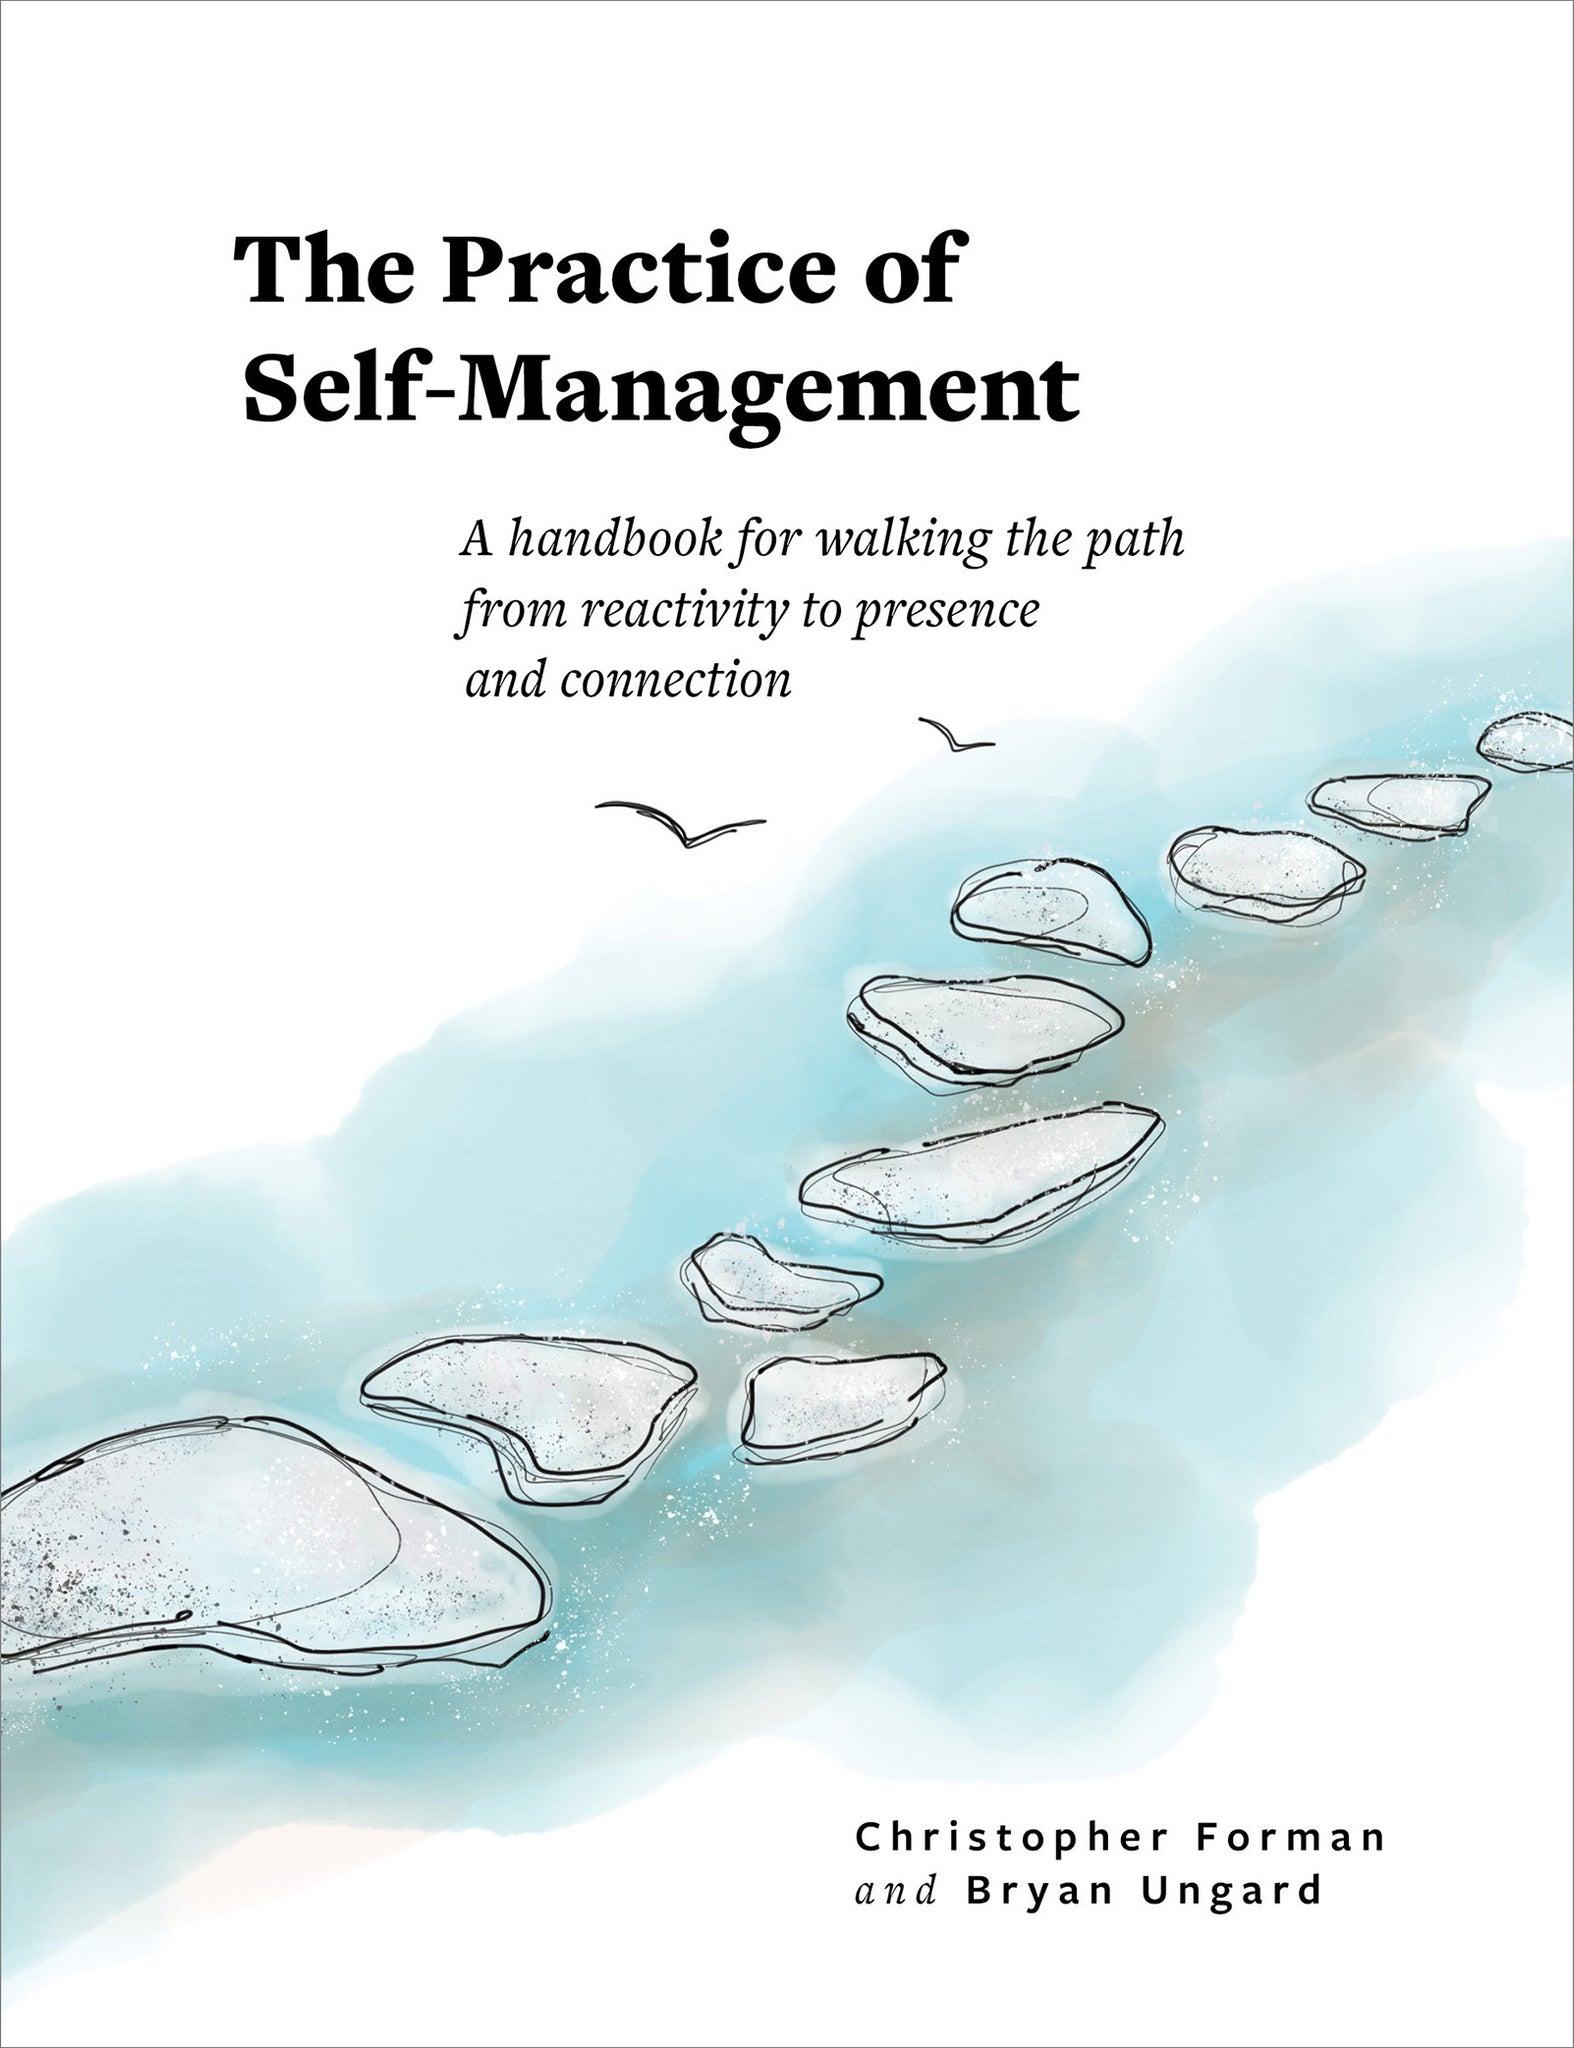 The Practice of Self-Management